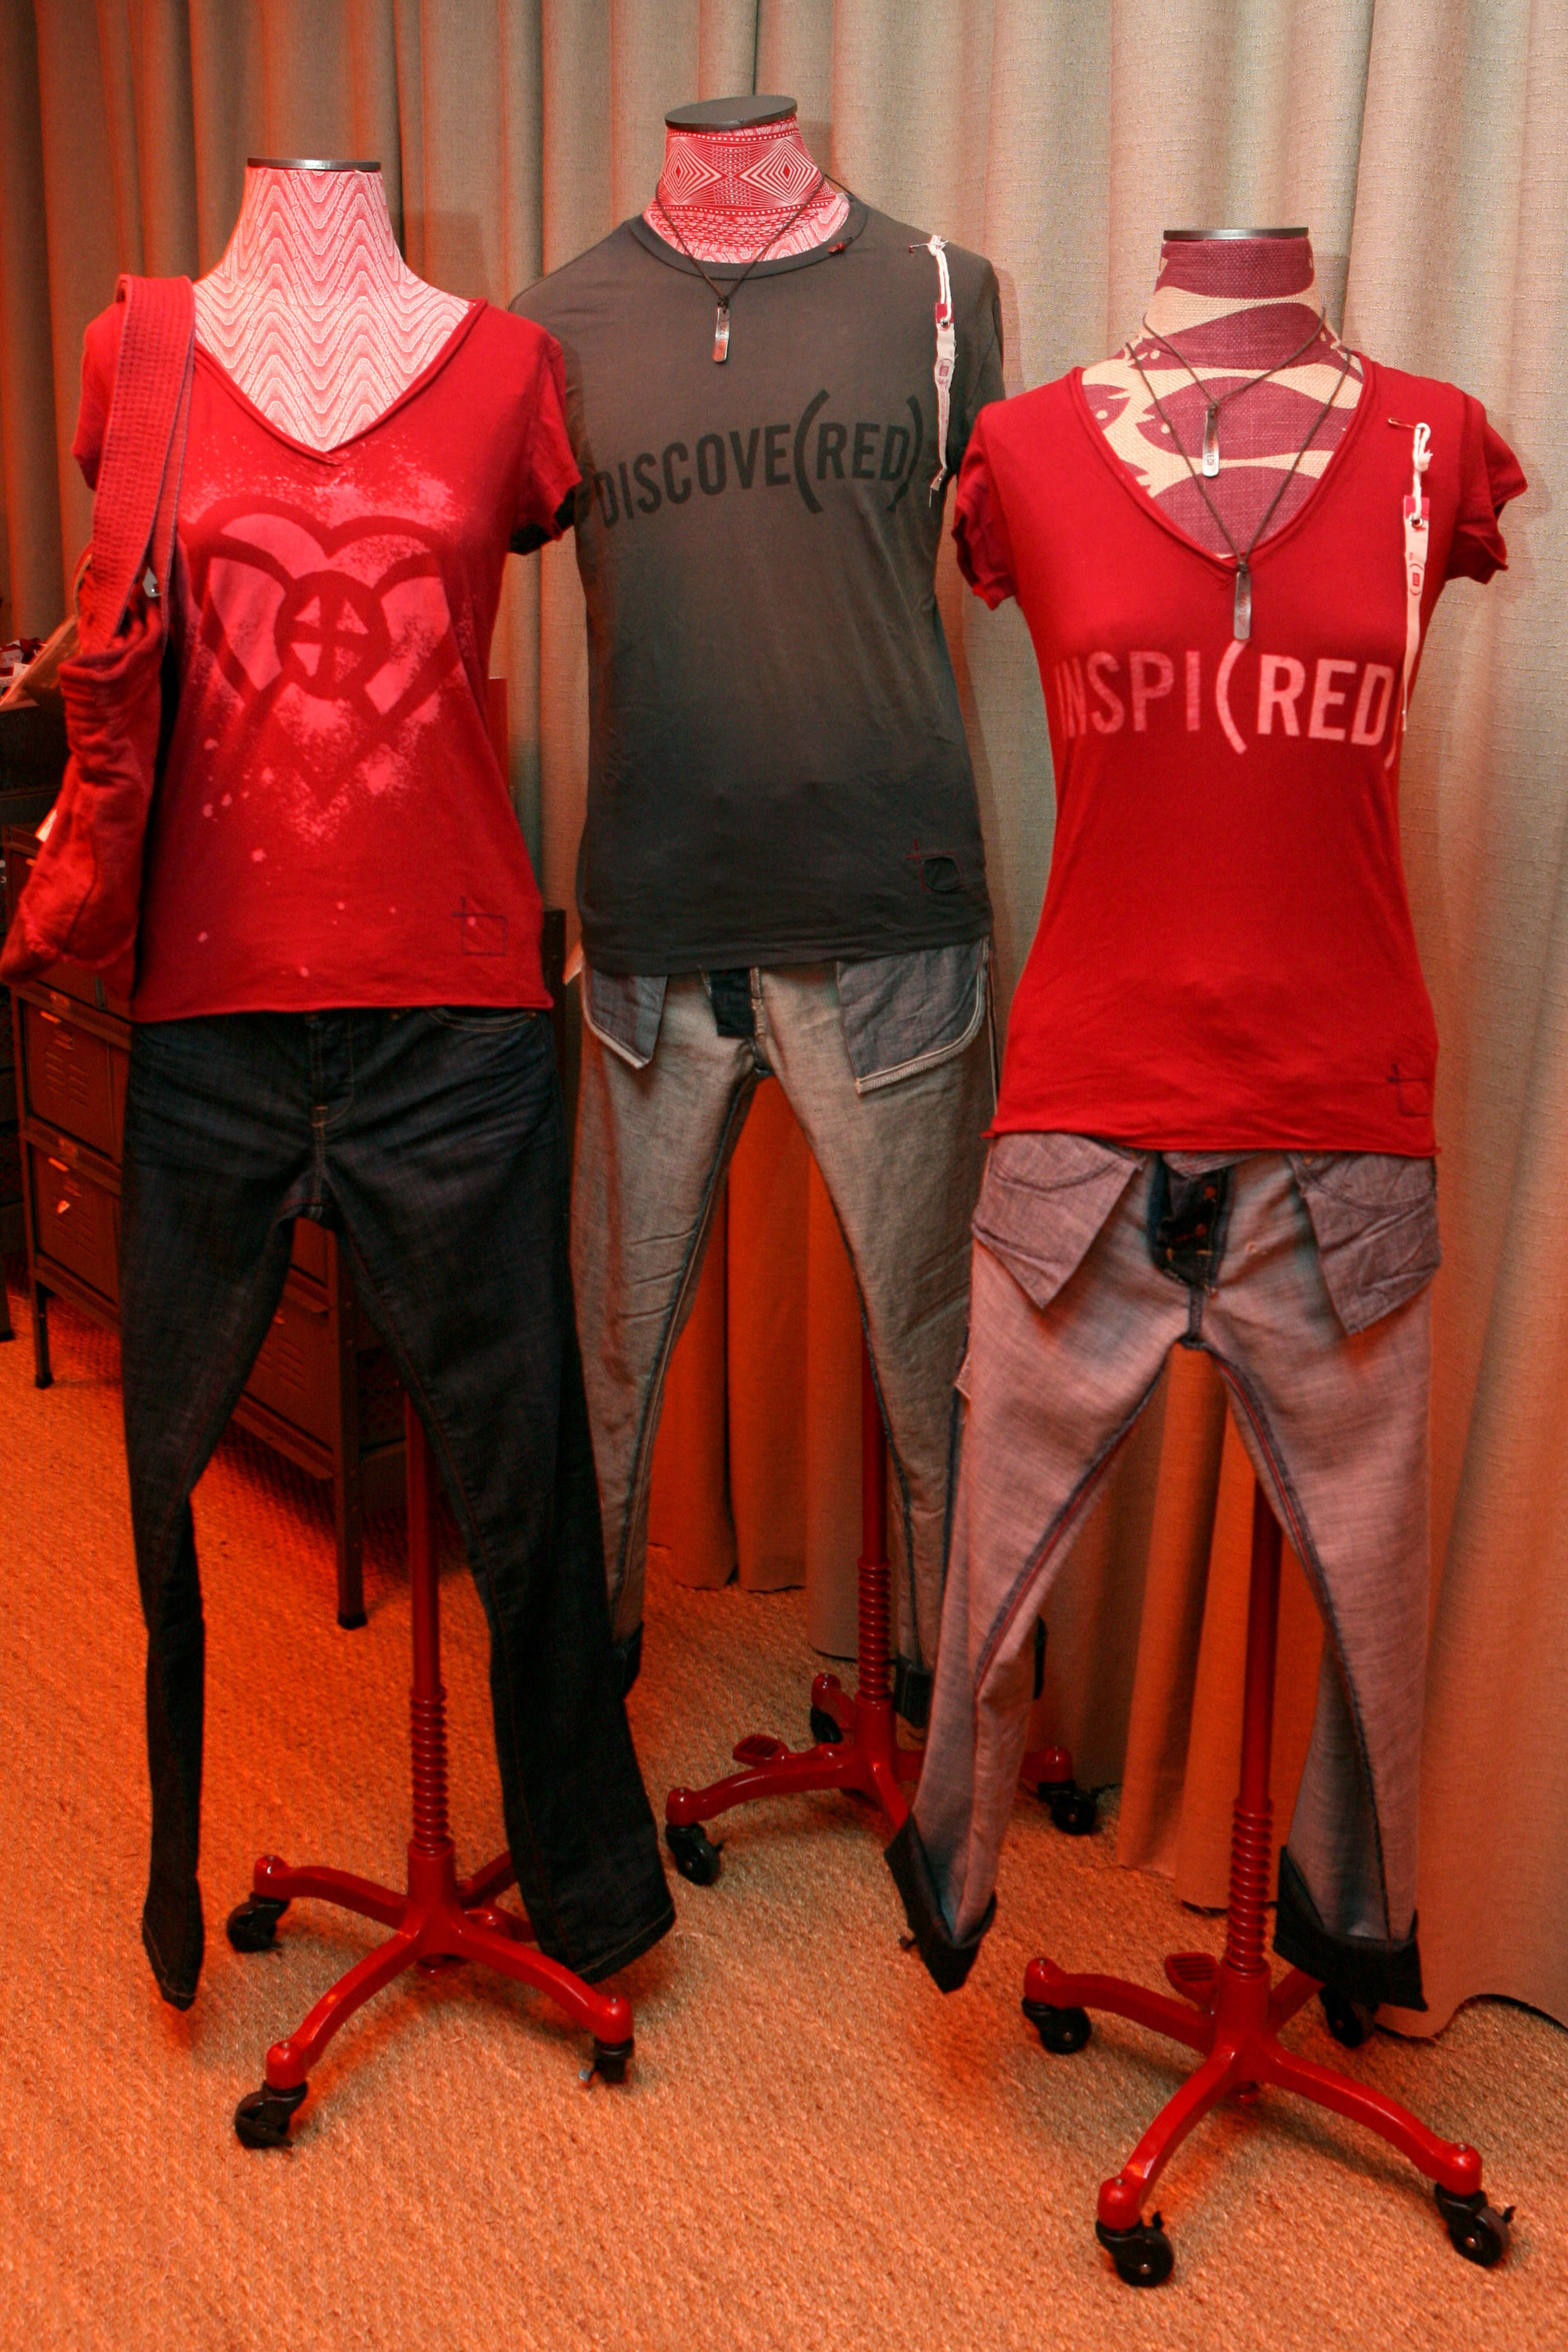 Three T-shirts from Gap&#x27;s collaboration with Product Red on dress forms